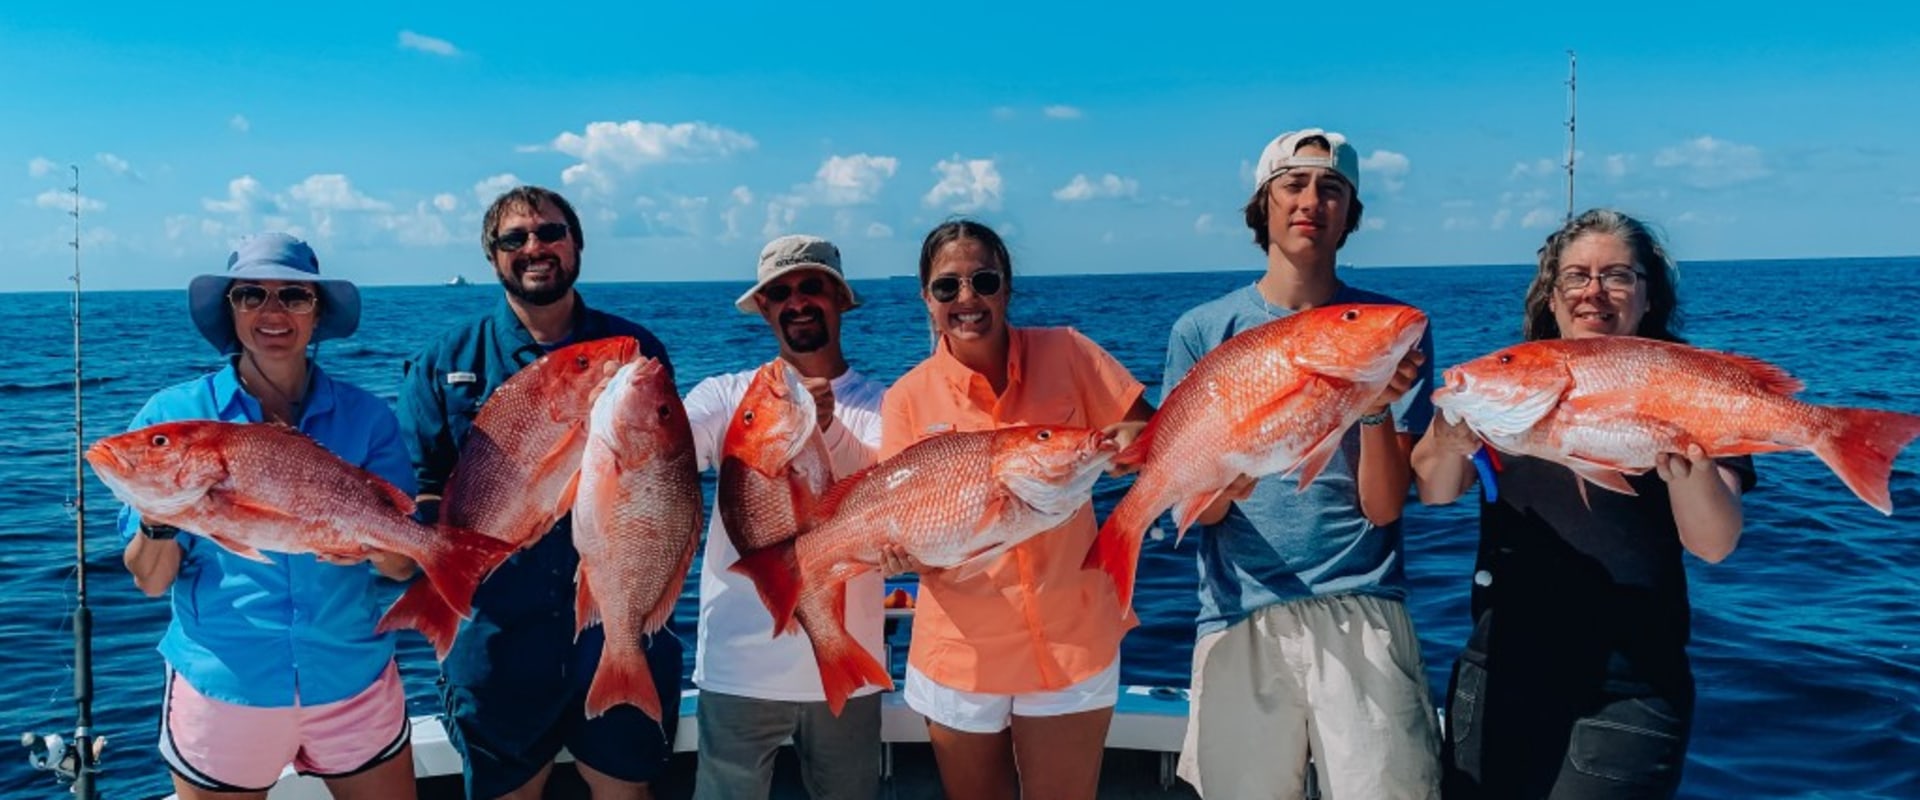 Where to fish charters?